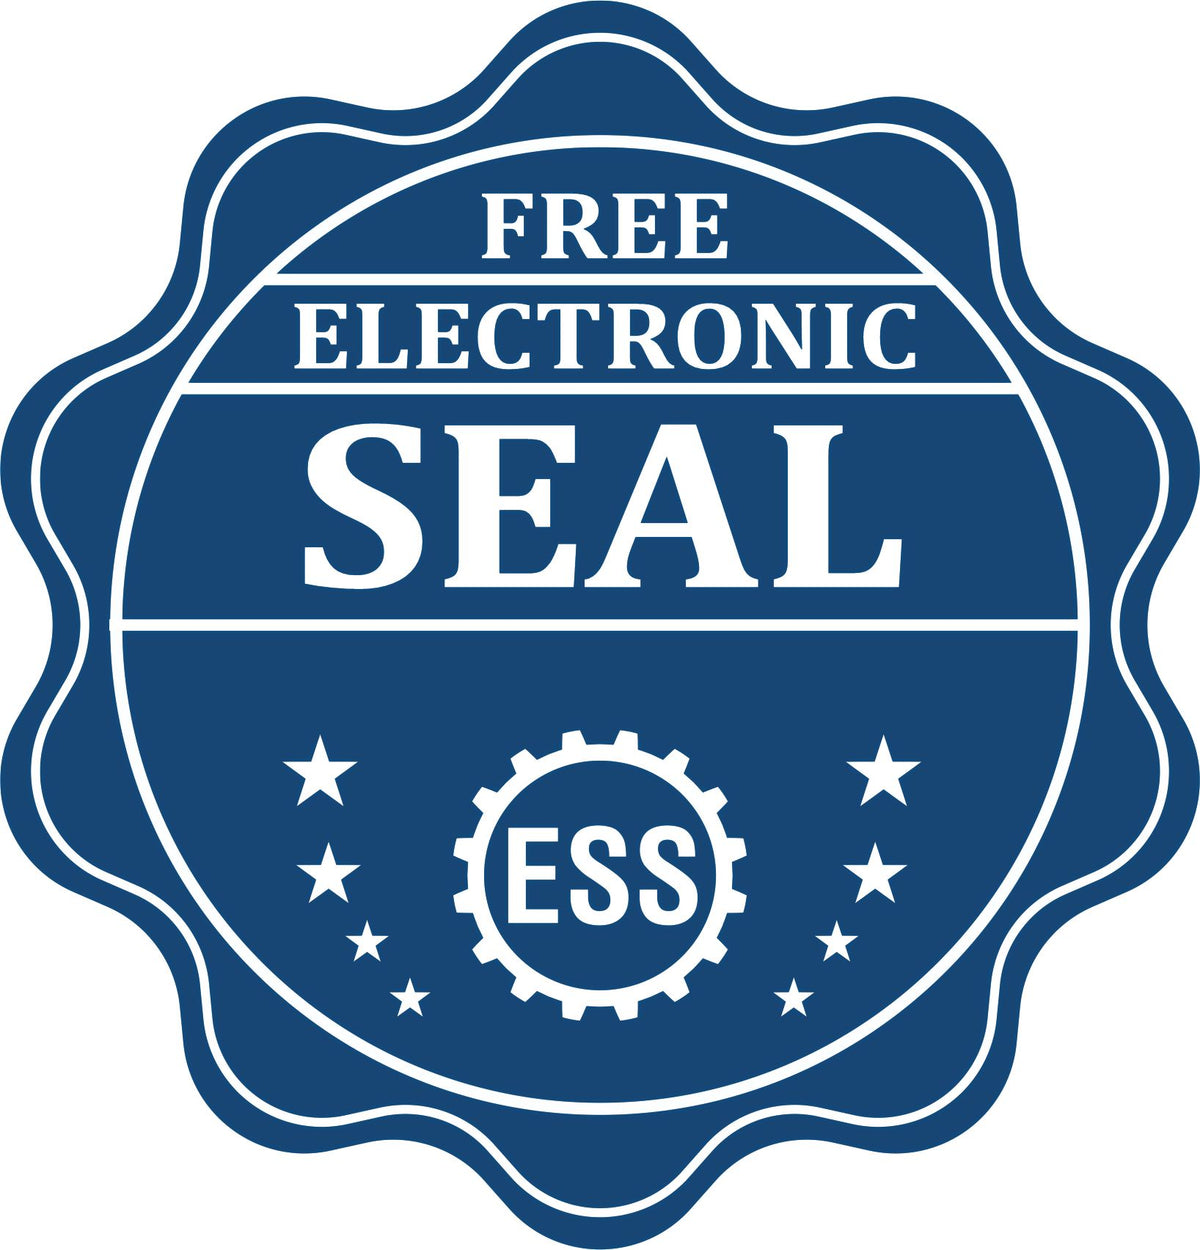 A badge showing a free electronic seal for the Gift Ohio Geologist Seal with stars and the ESS gear on the emblem.